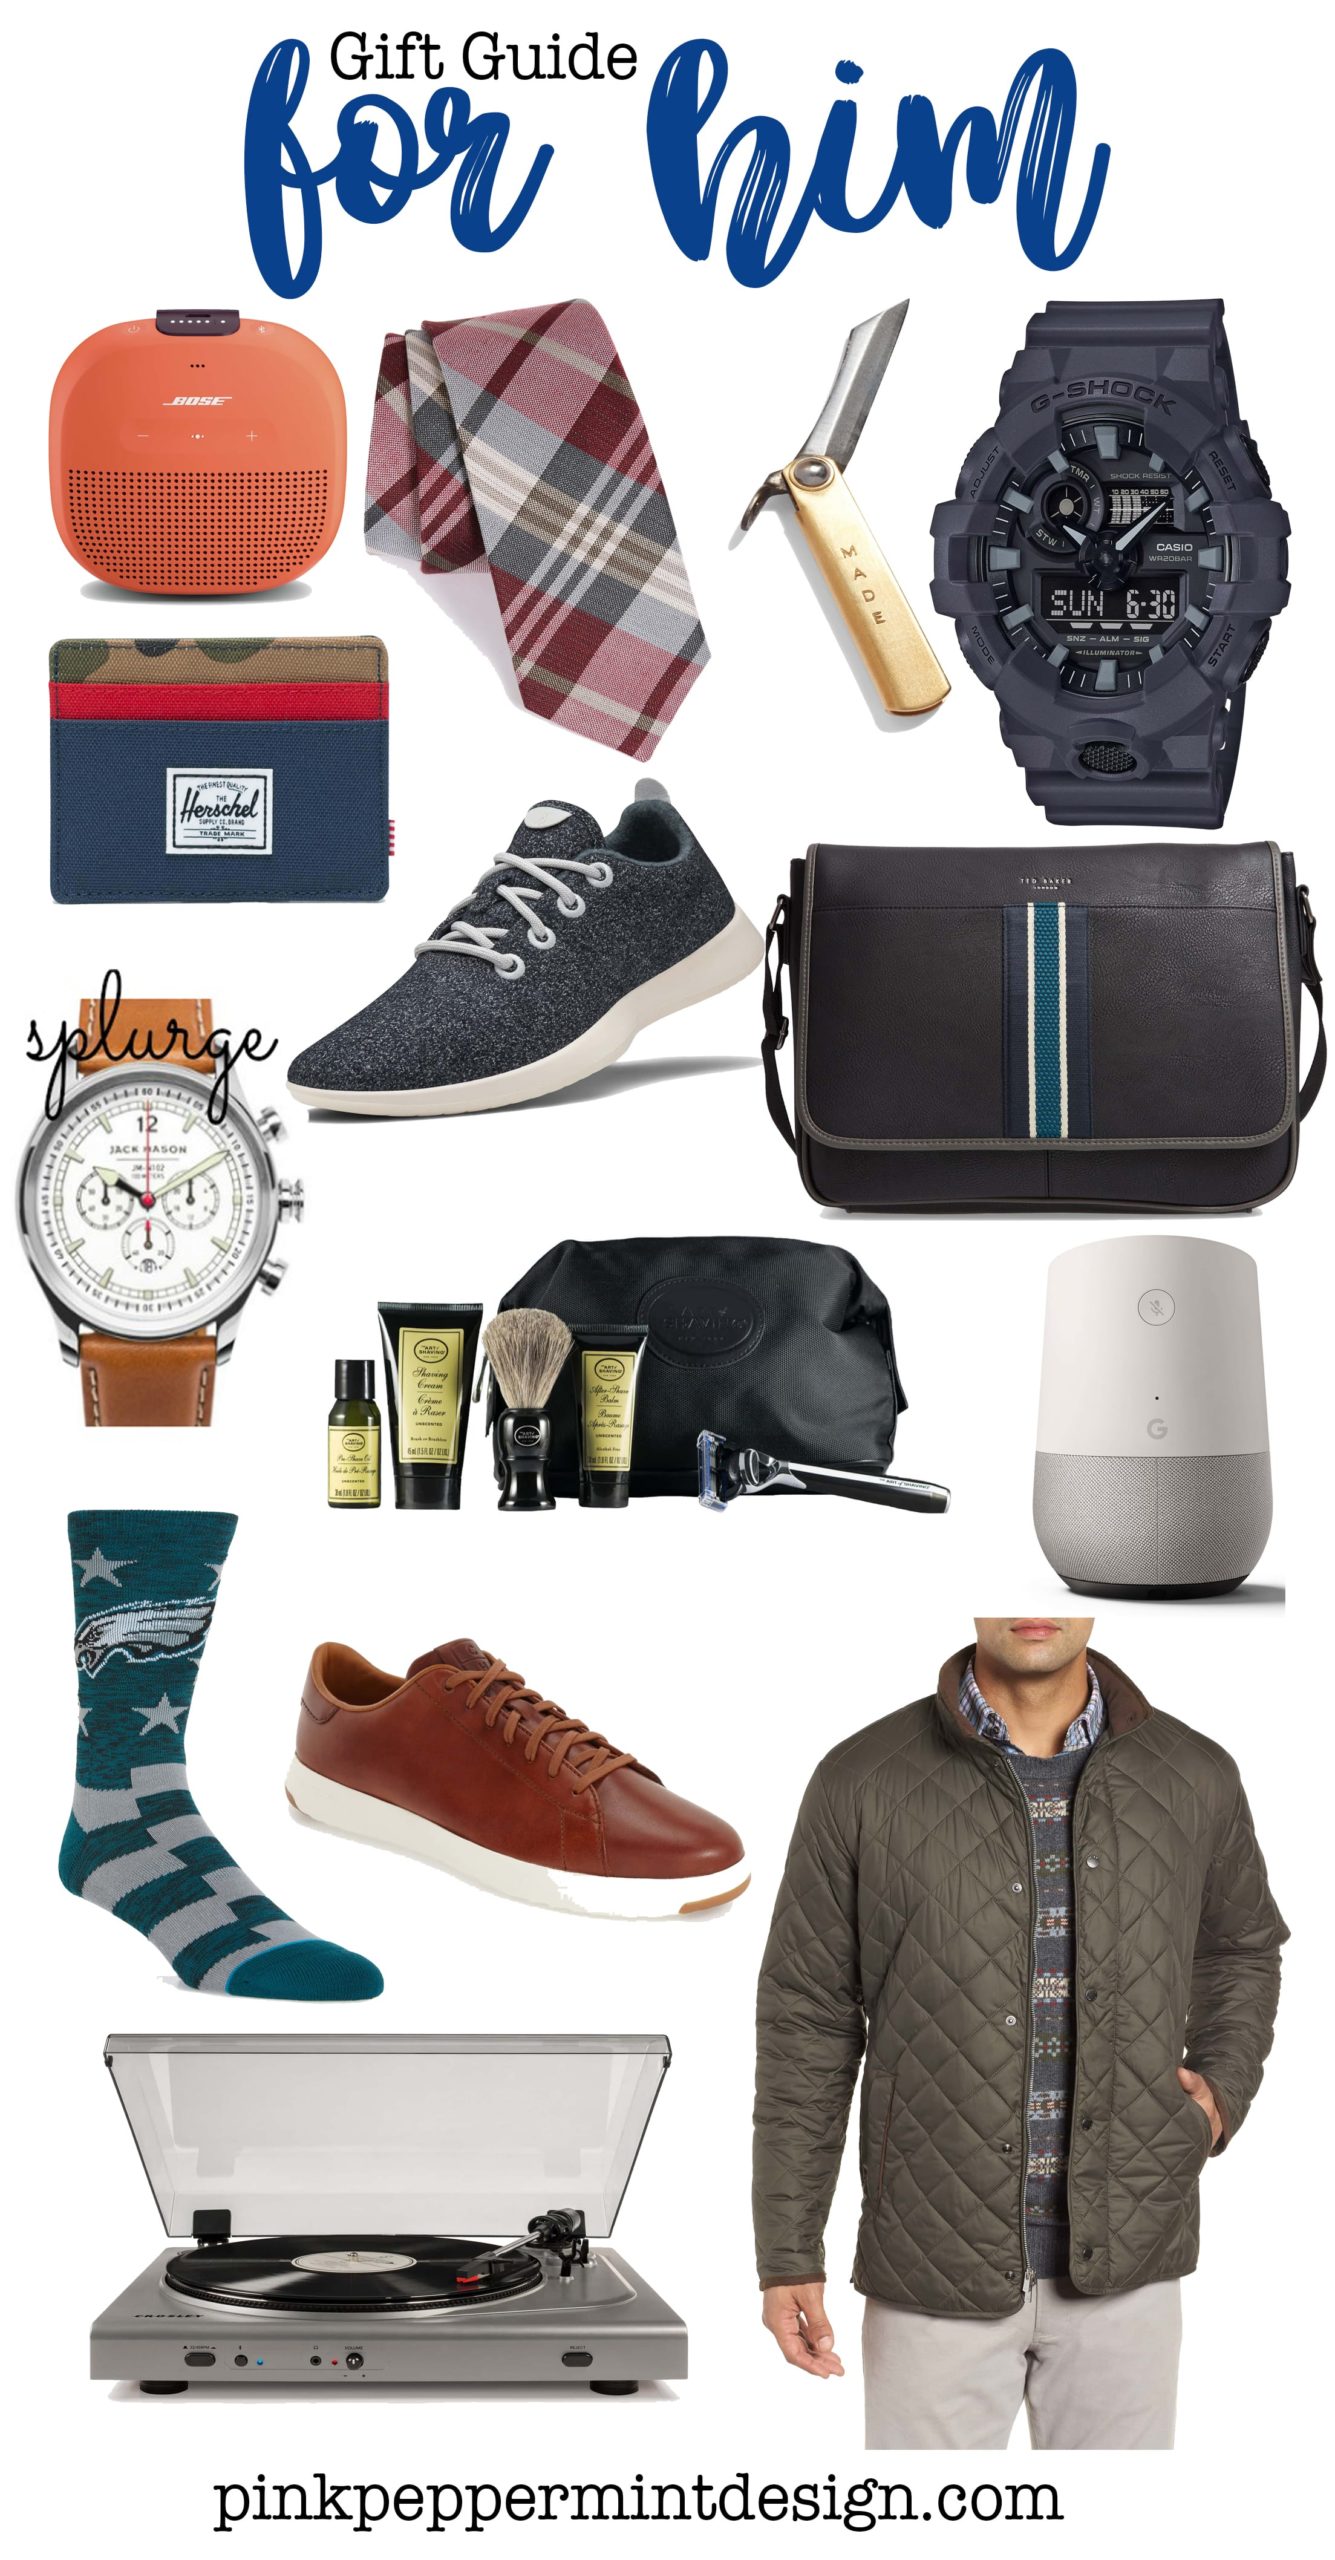 14 Great Christmas Gift Ideas for Dad - Christmas The Little List ...